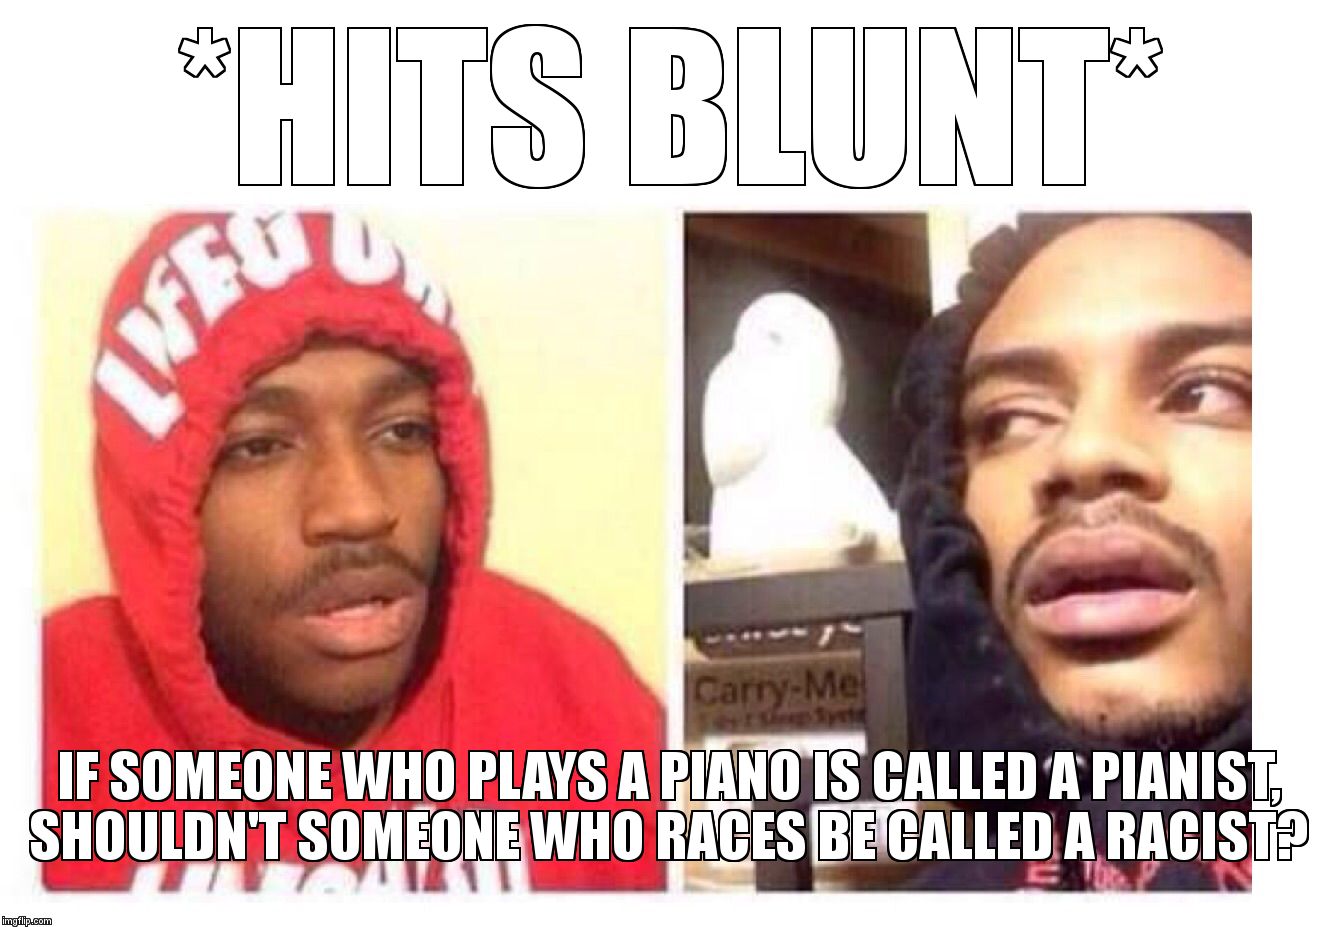 Hits blunt | *HITS BLUNT*; IF SOMEONE WHO PLAYS A PIANO IS CALLED A PIANIST, SHOULDN'T SOMEONE WHO RACES BE CALLED A RACIST? | image tagged in hits blunt | made w/ Imgflip meme maker